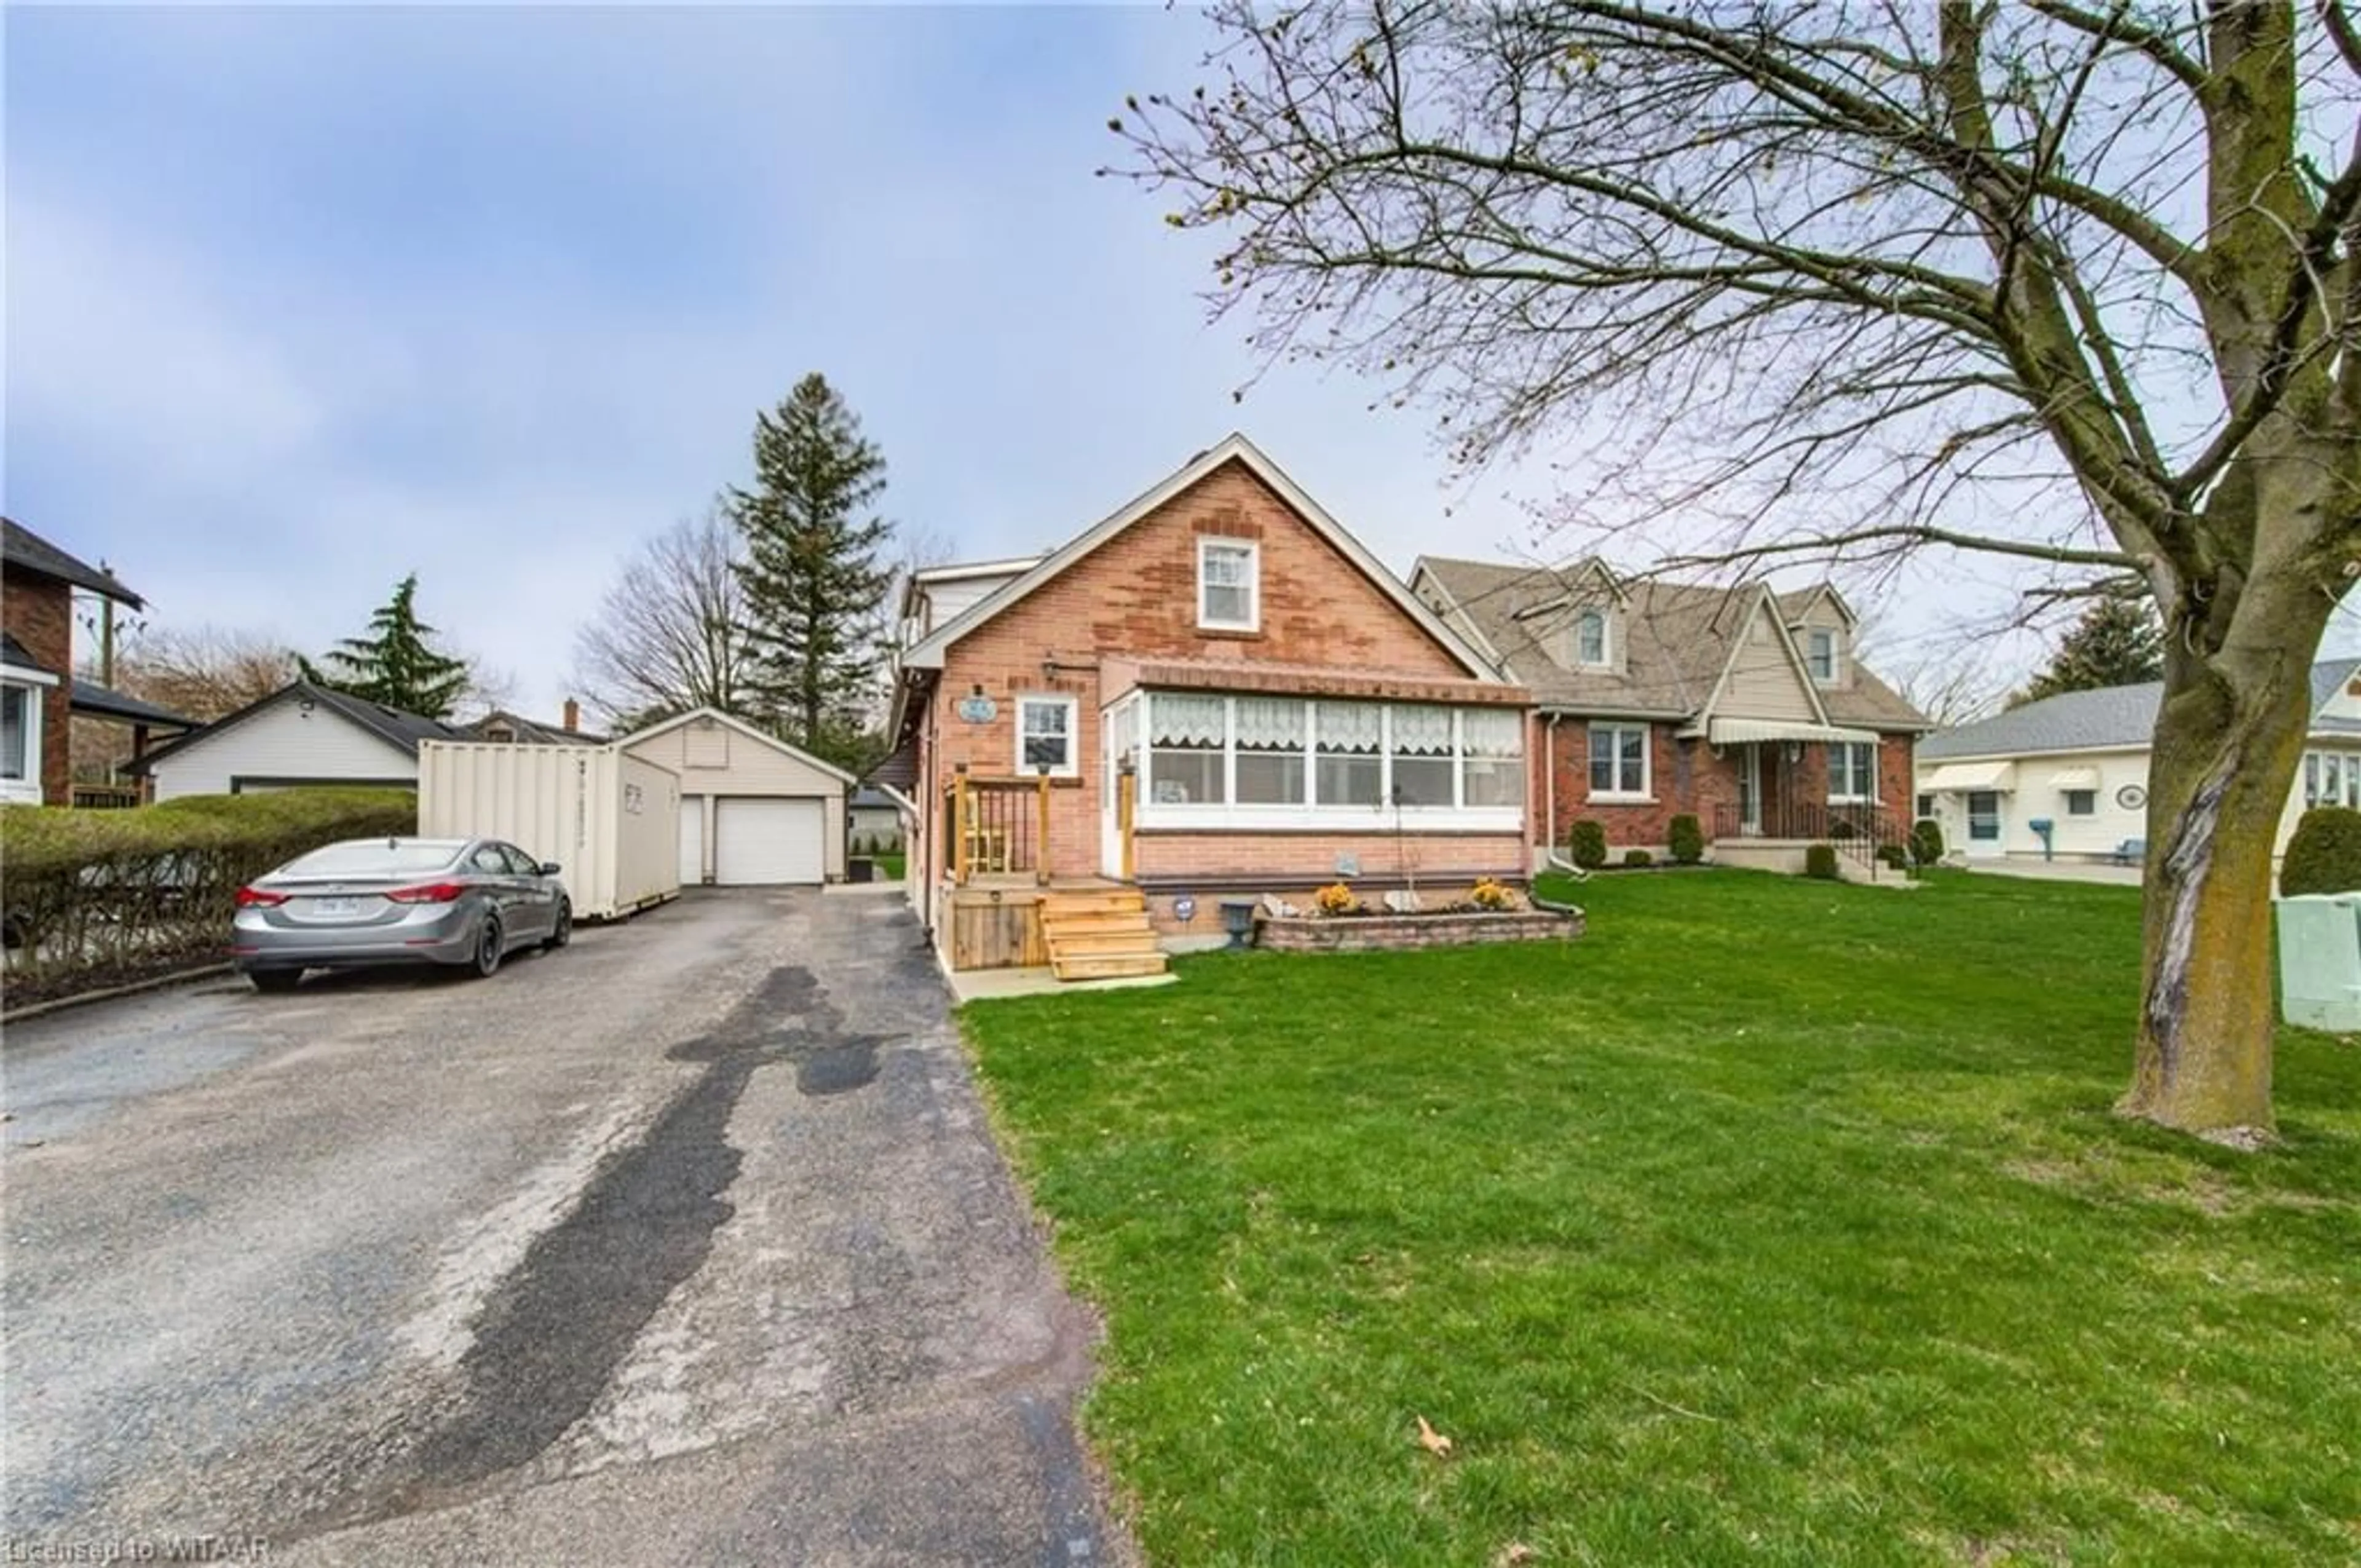 Frontside or backside of a home for 164 Wilson St, Woodstock Ontario N4S 3P4